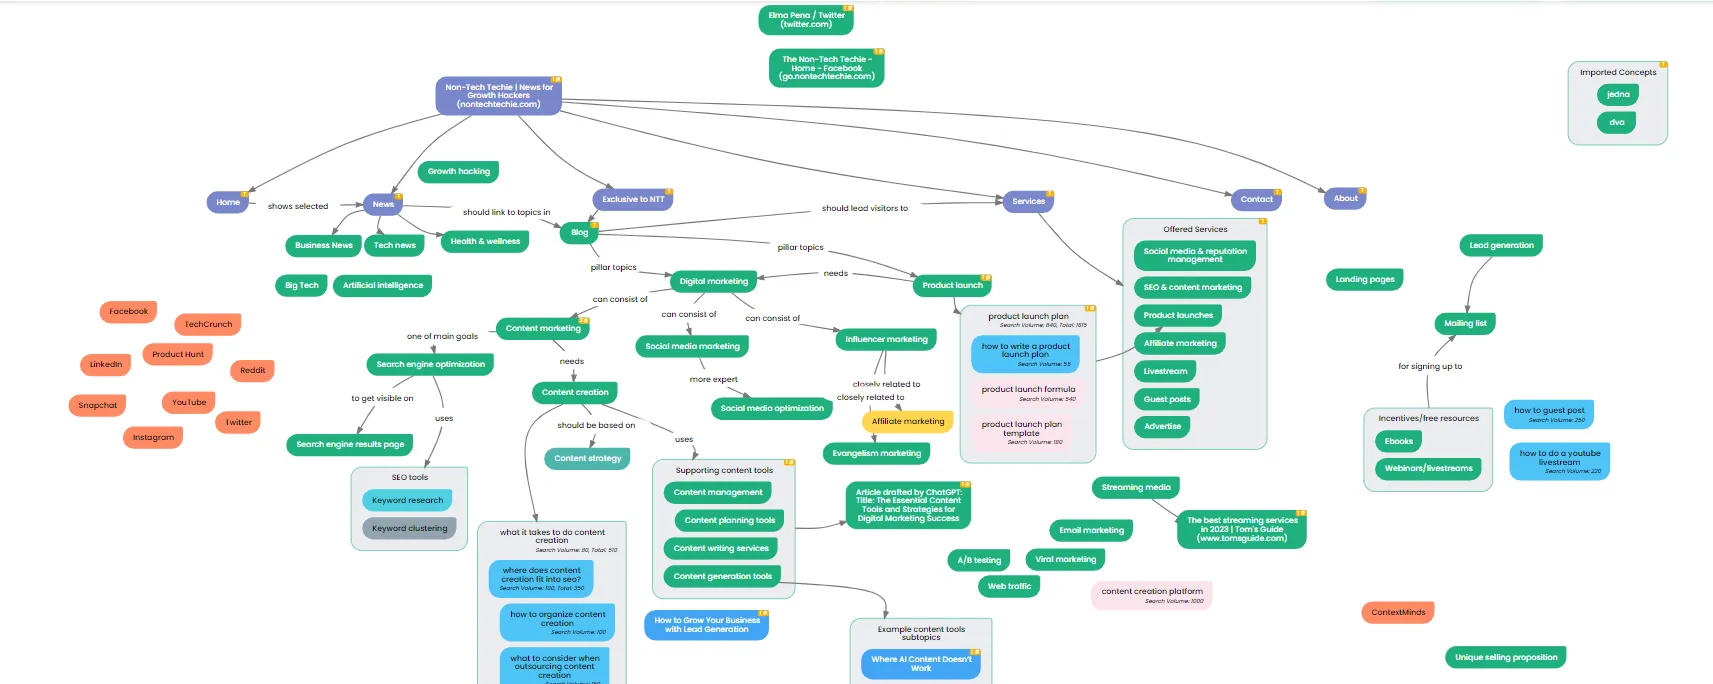 ContextMinds for Content Mapping